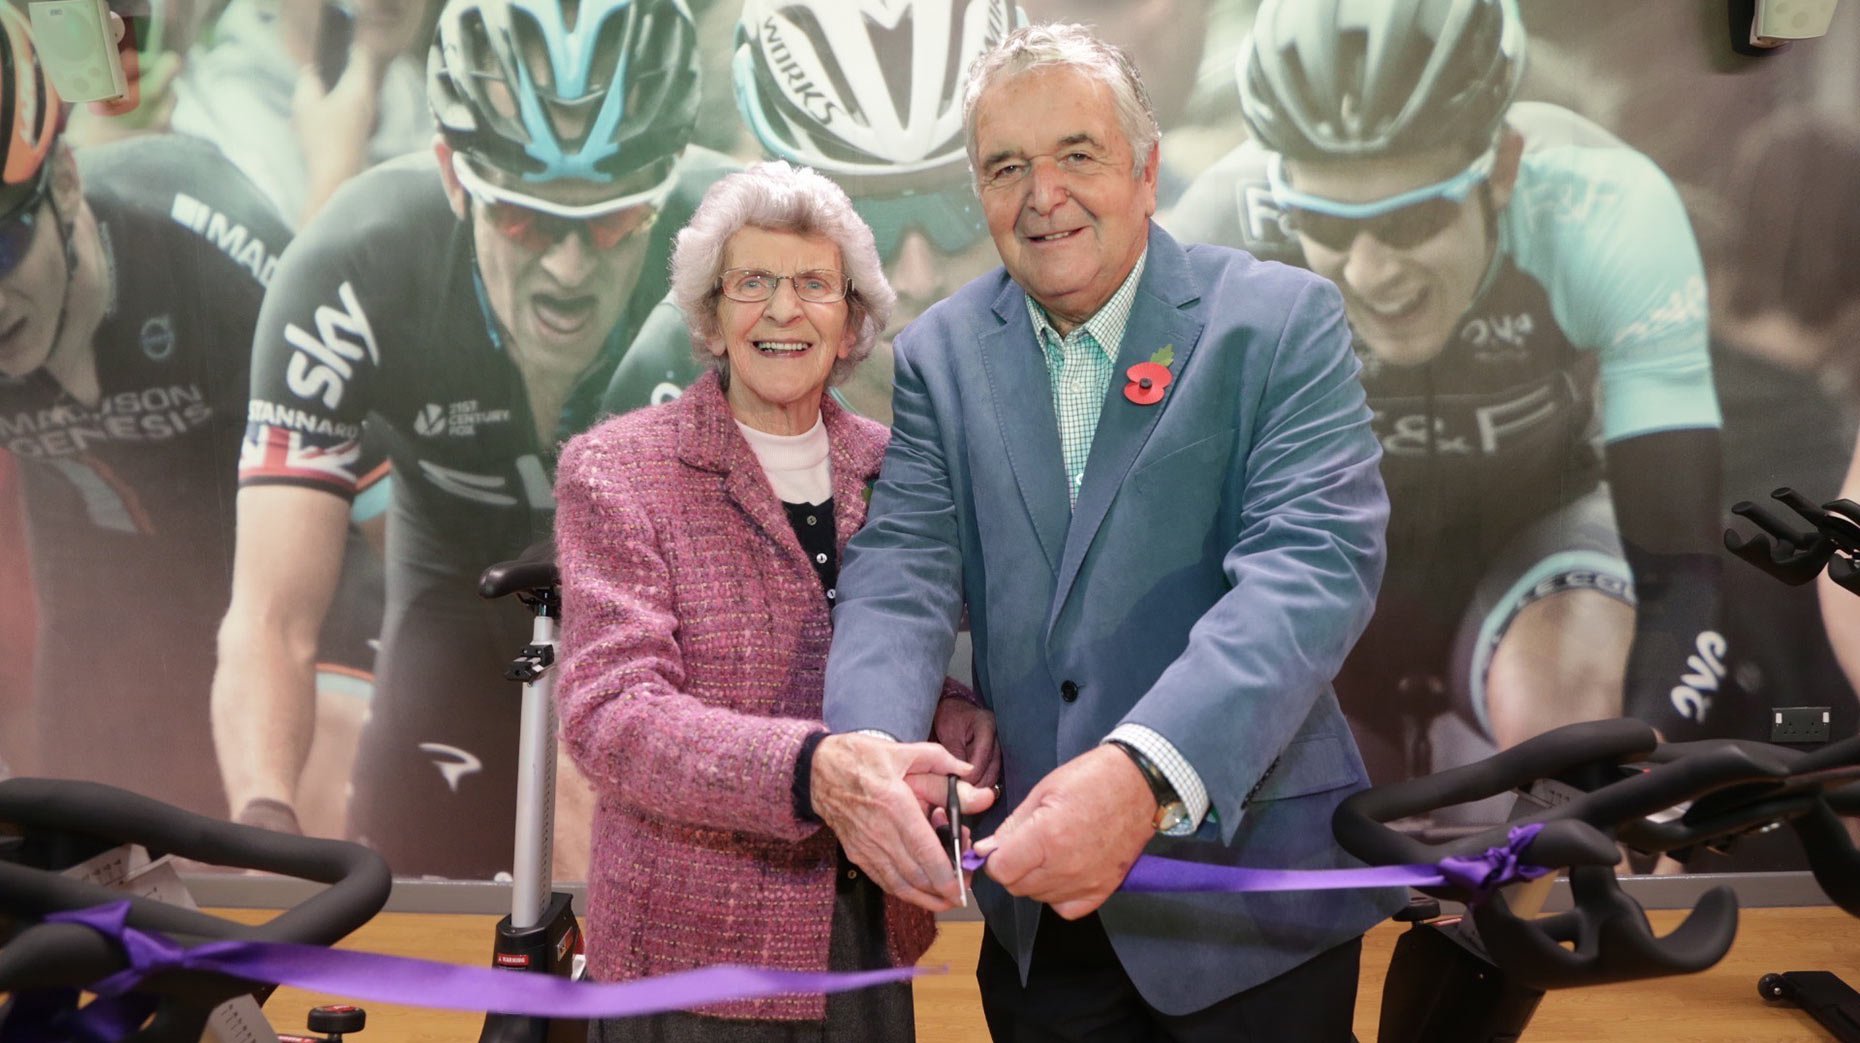 Marion Brighton, Leader of North Kesteven District Council and former Lincoln Grand Prix organiser Ian Emmerson marking the occasion. Photo: Phil Crow